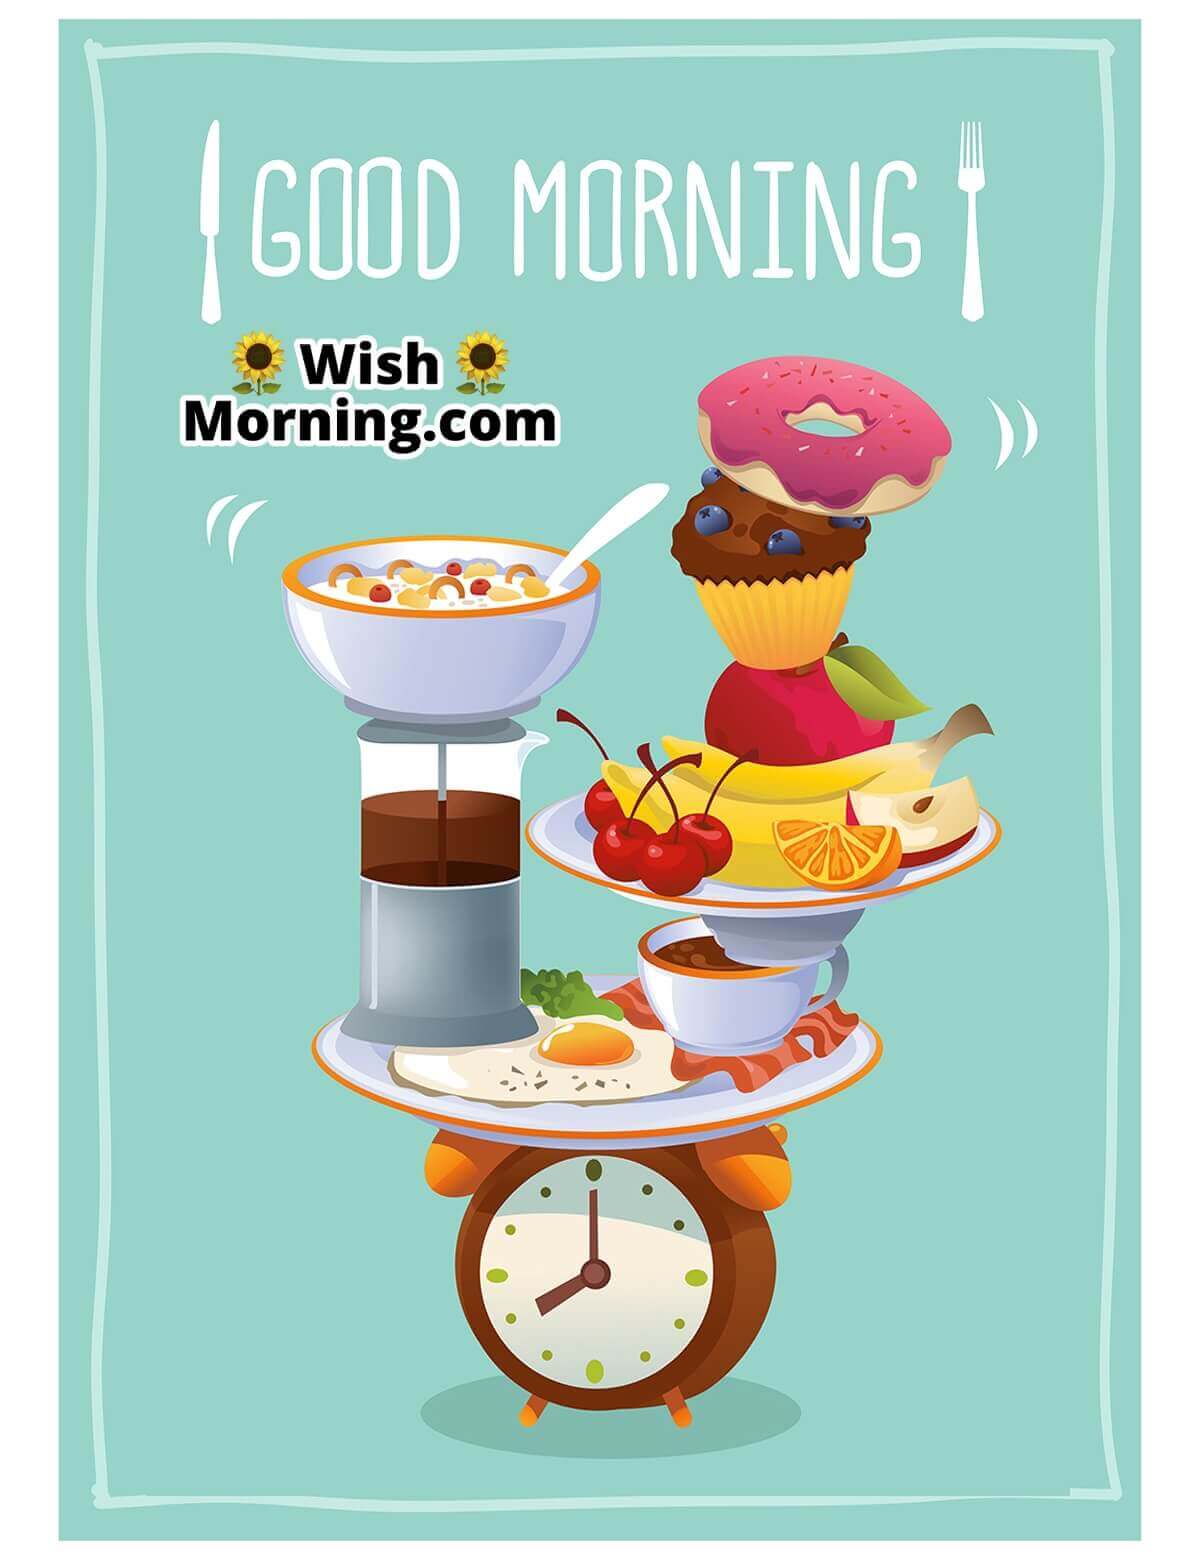 Good Morning Breakfast On Time Image